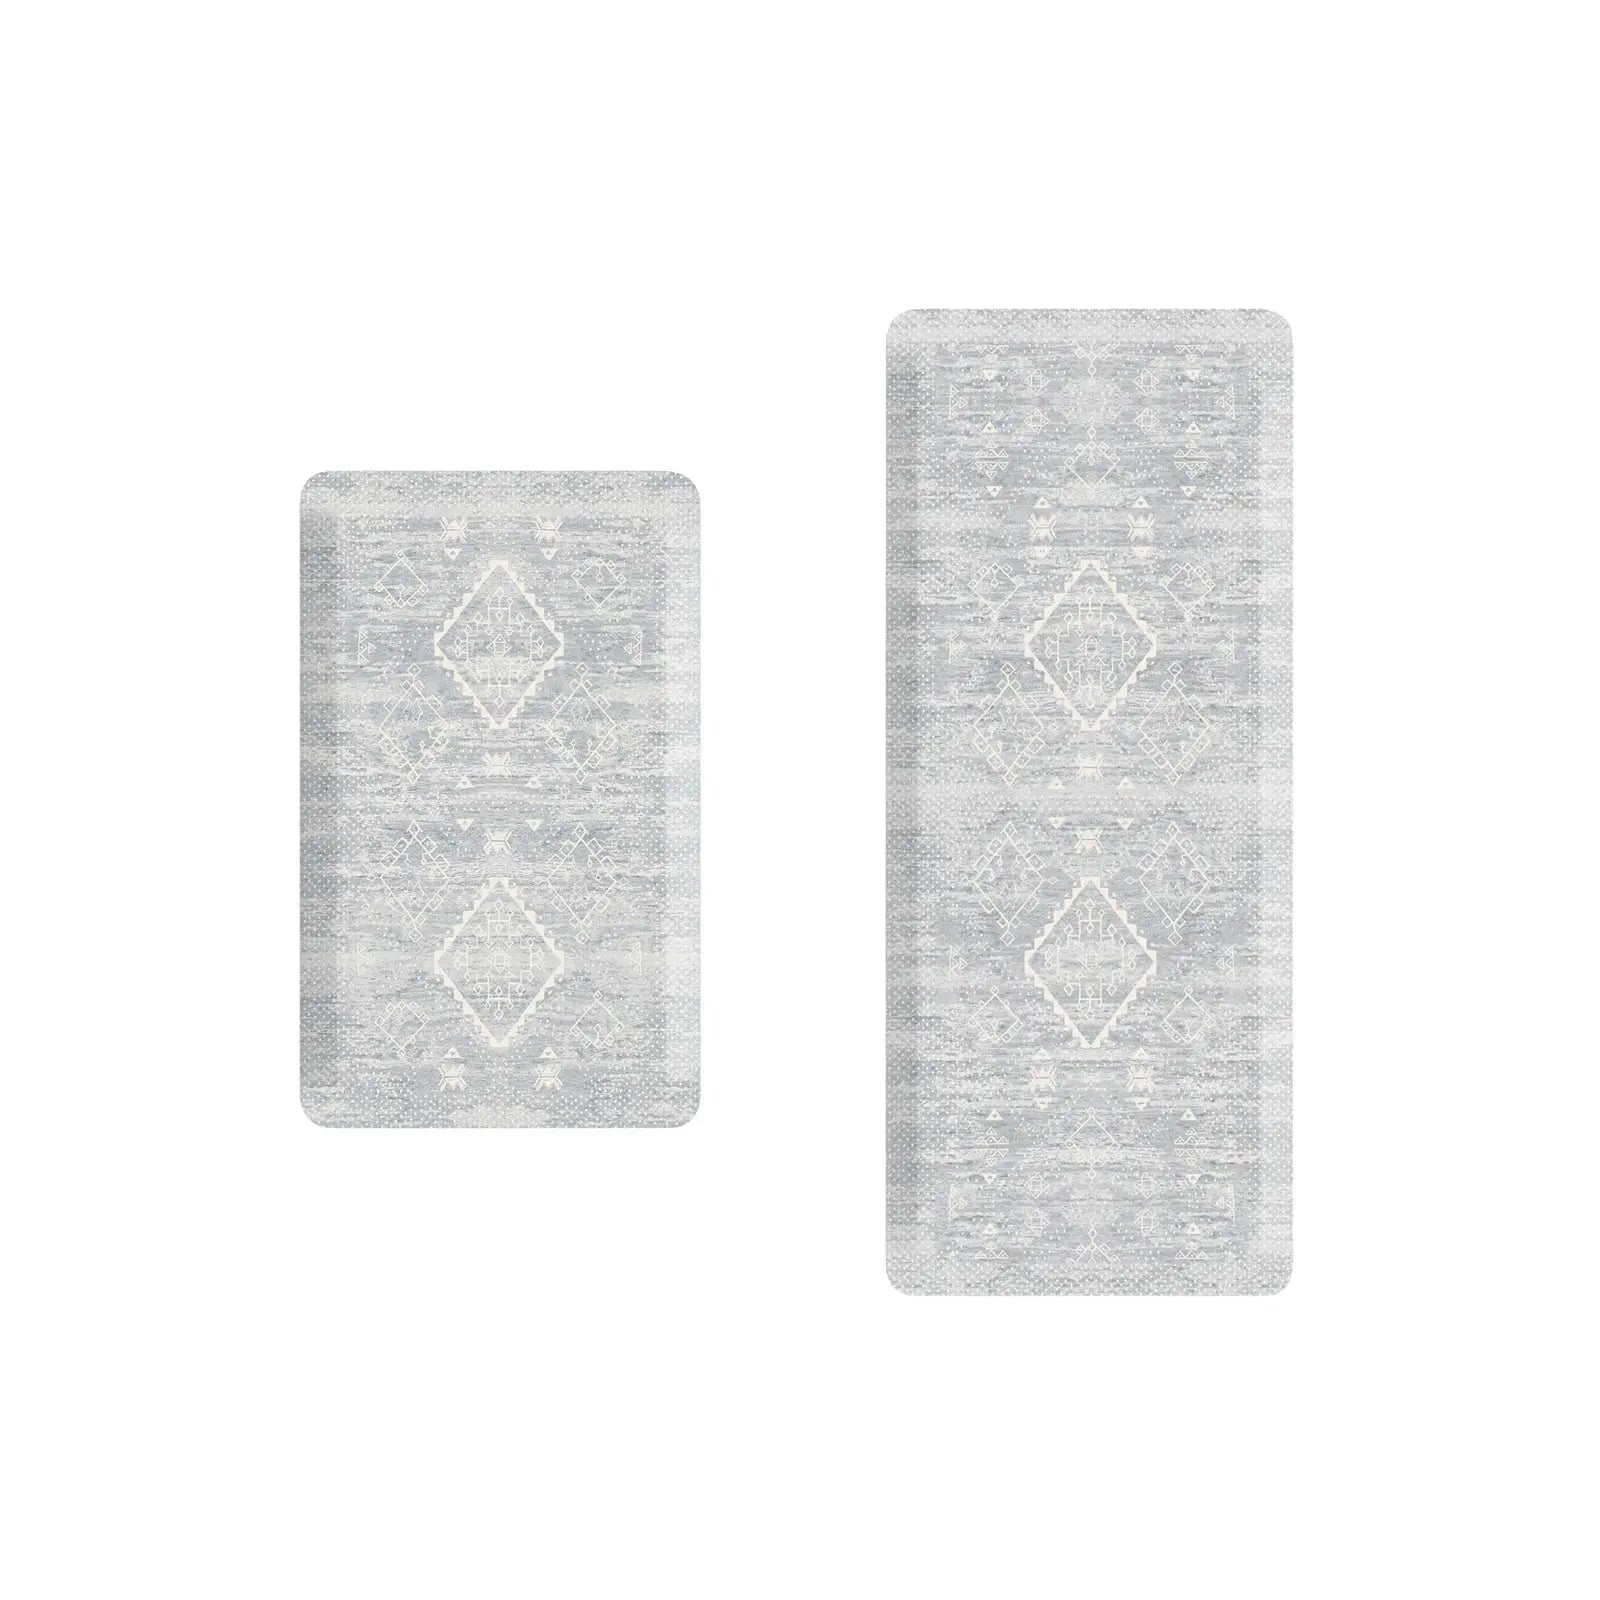 Ula gray and white Minimal Boho Pattern Standing Mat shown in sizes 22x36 and 22x54